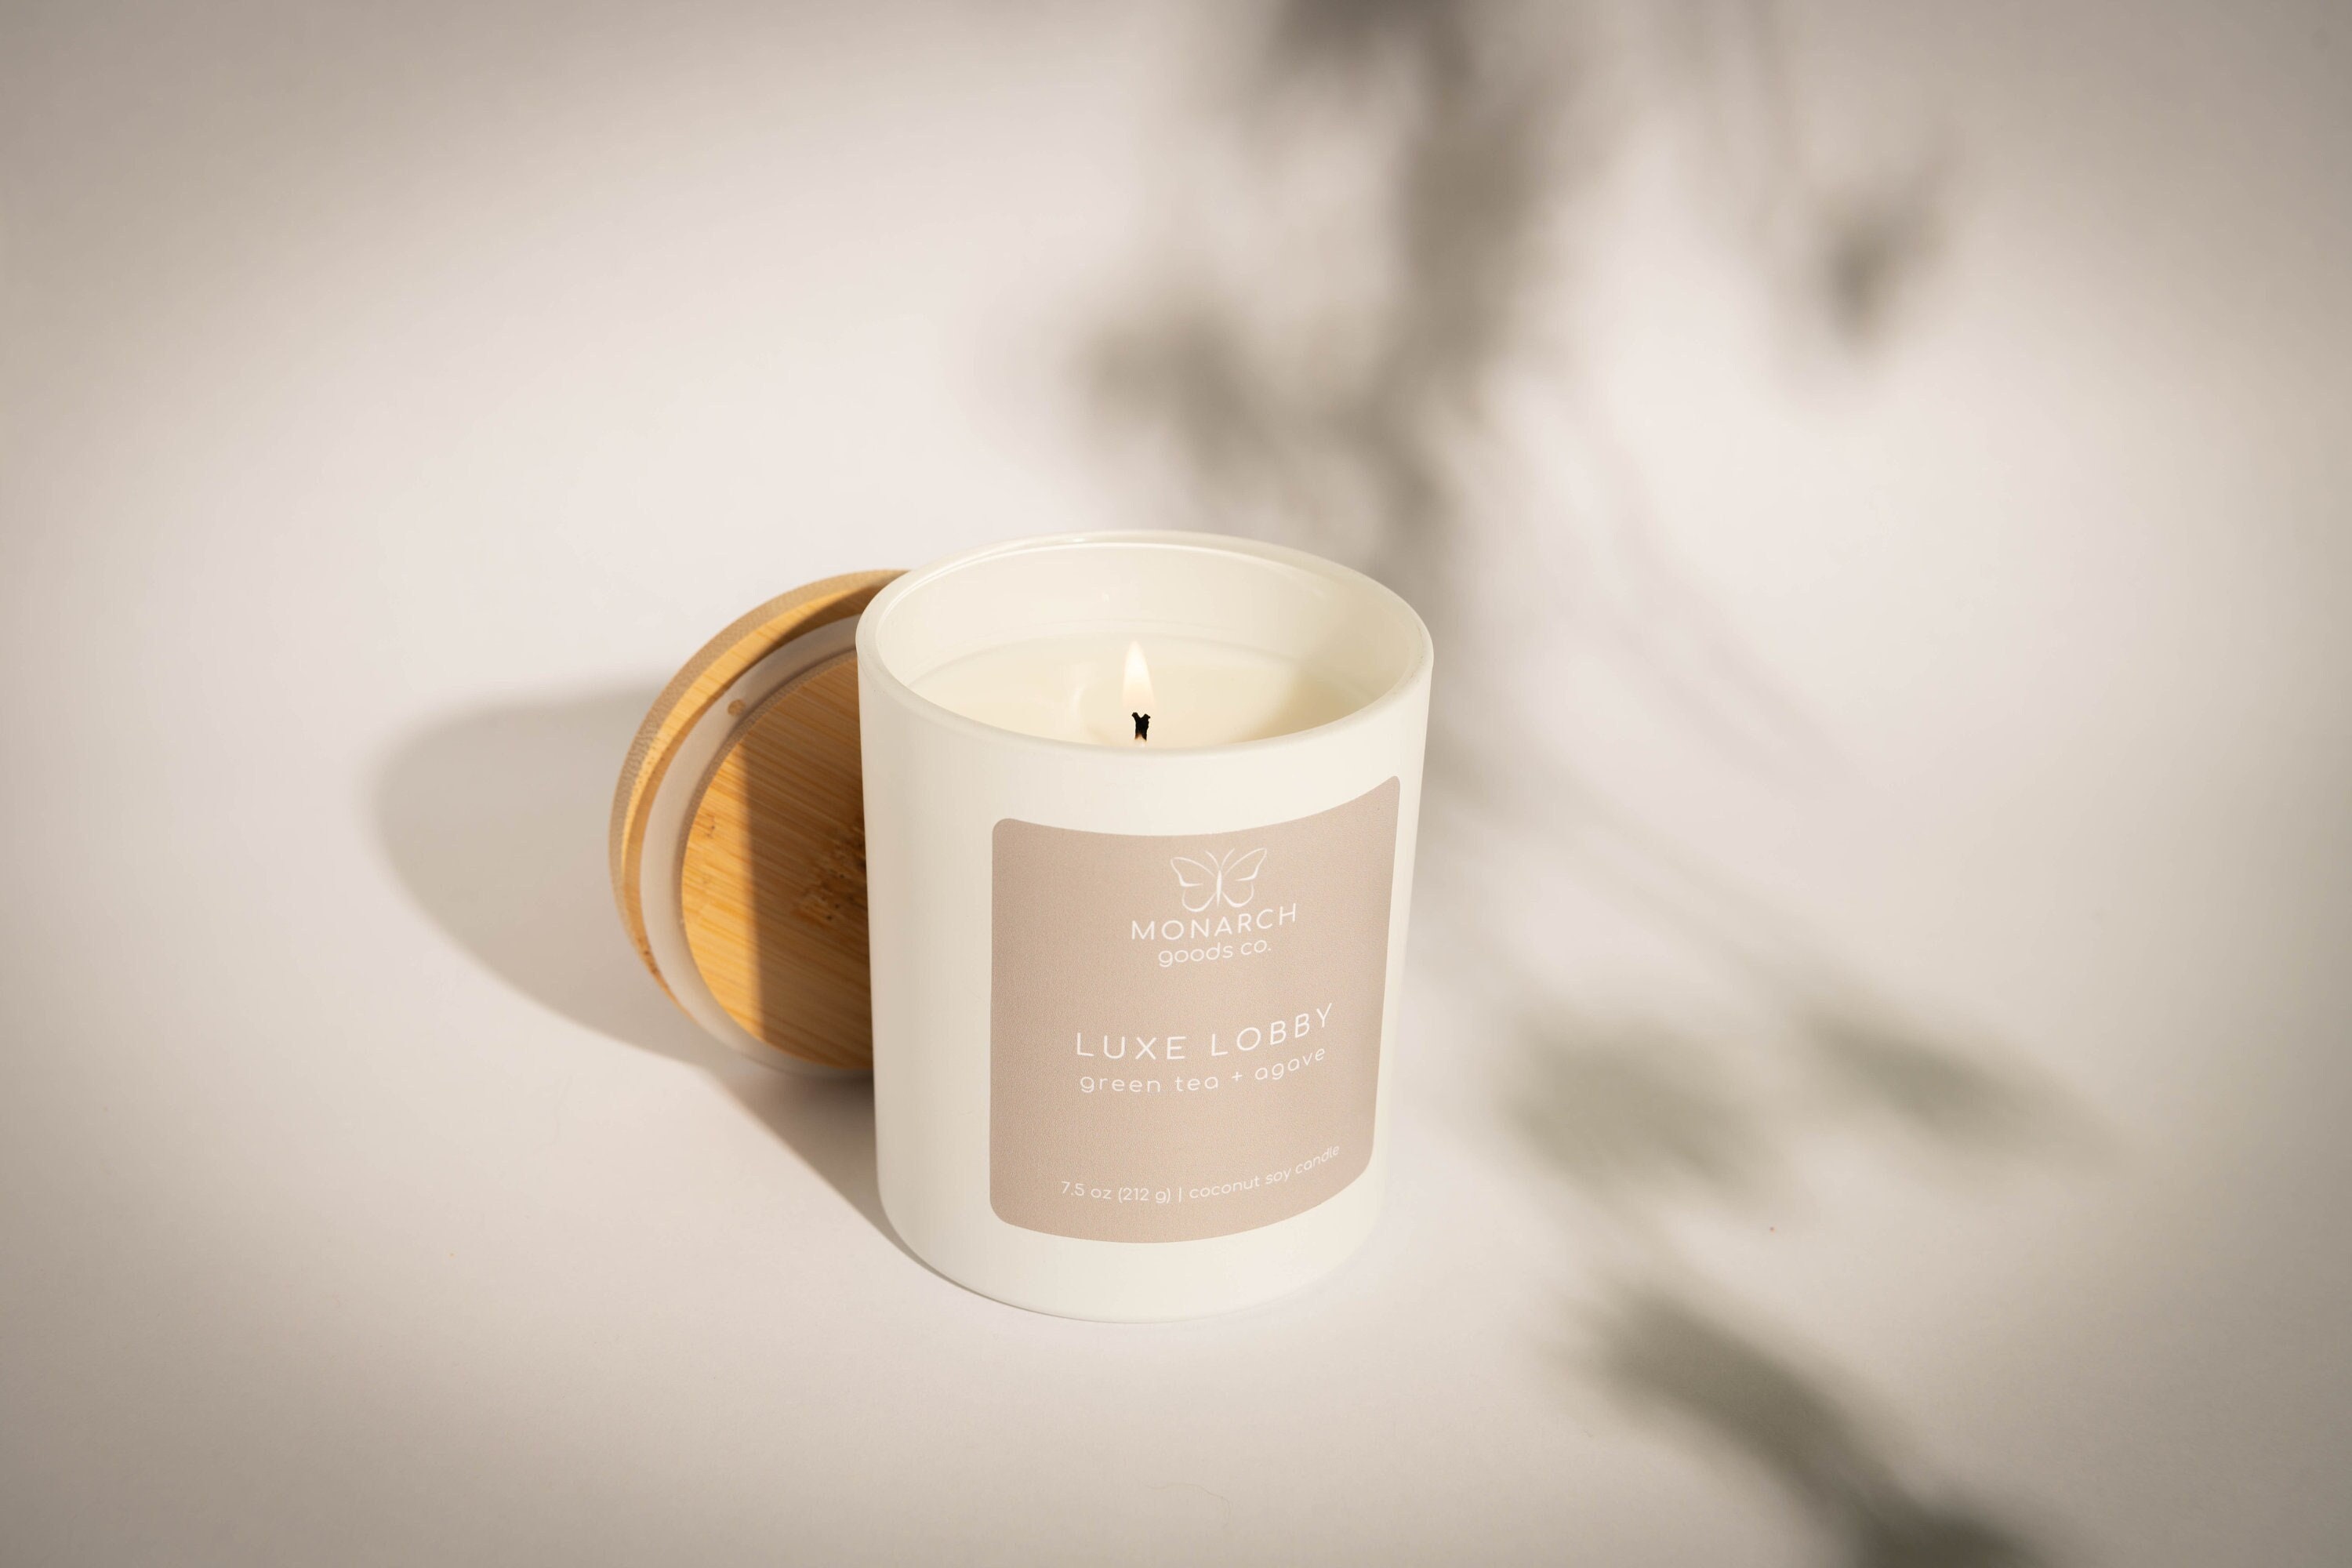 Park Scents The Contemp Candle - Accurate Smell of Disney Contemporary Resort Hotel Lobby - Natural Soy Blend - Vegan & Cruelty-Free - Handmade in